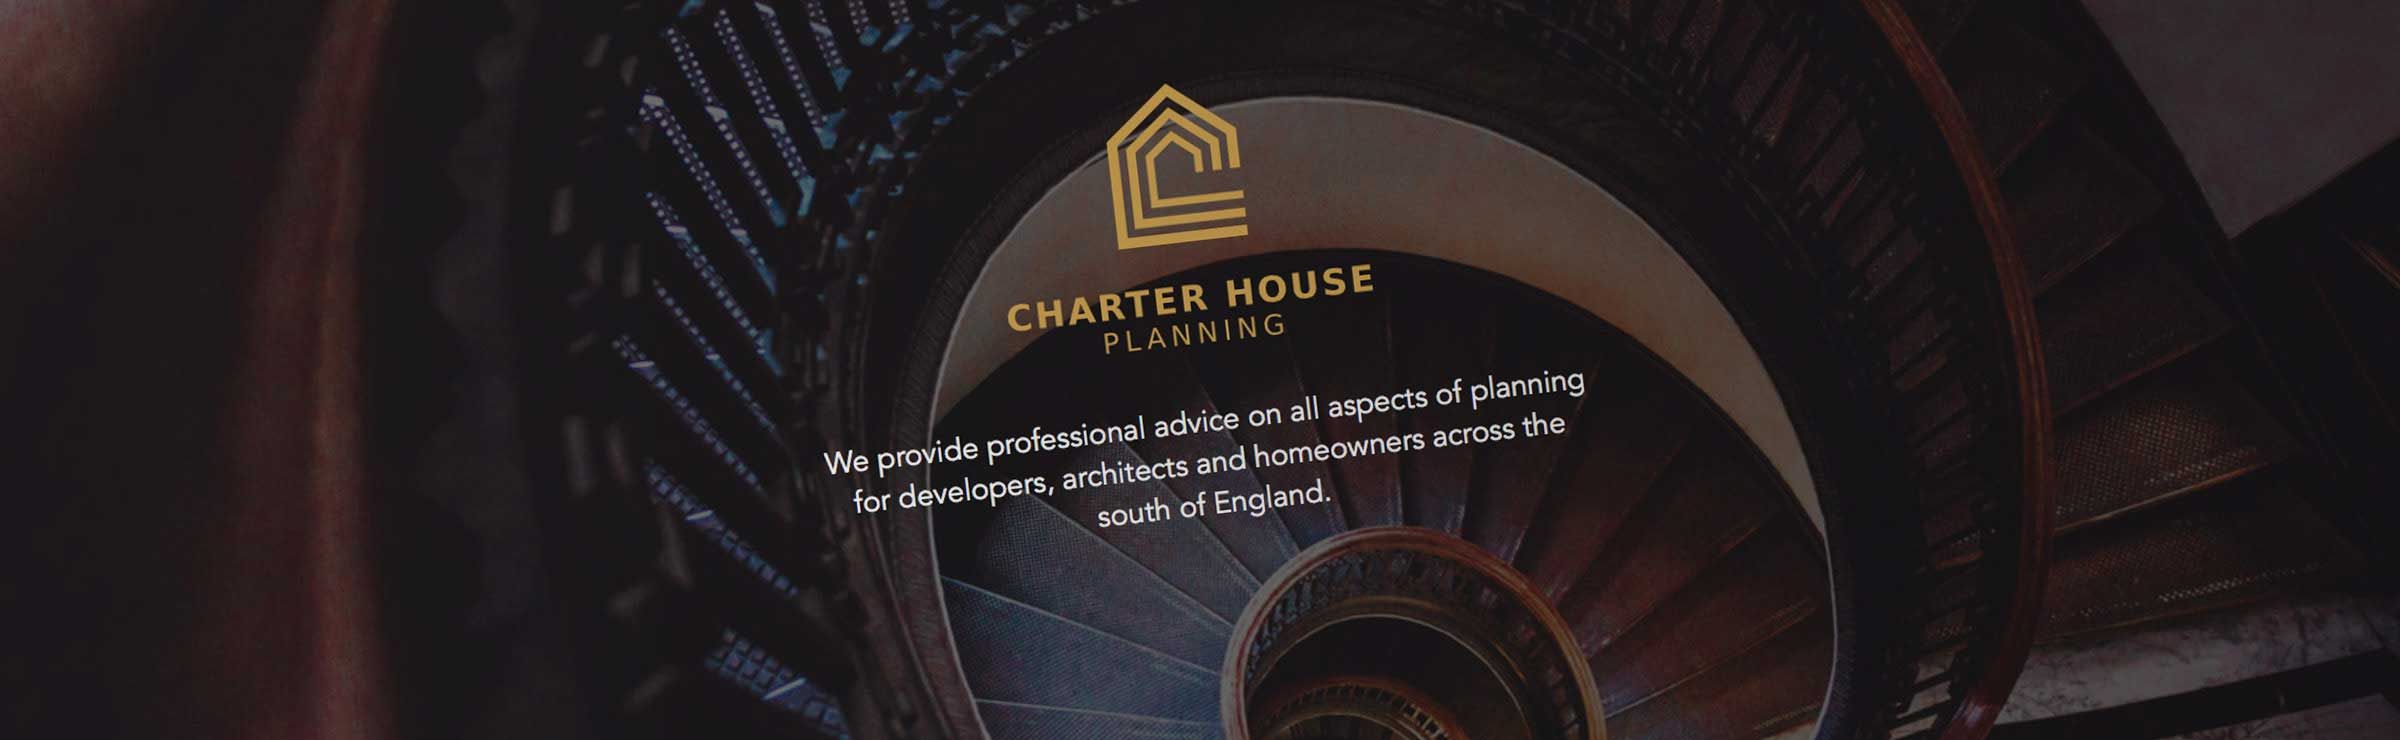 A sample page from the Charter House Planning website